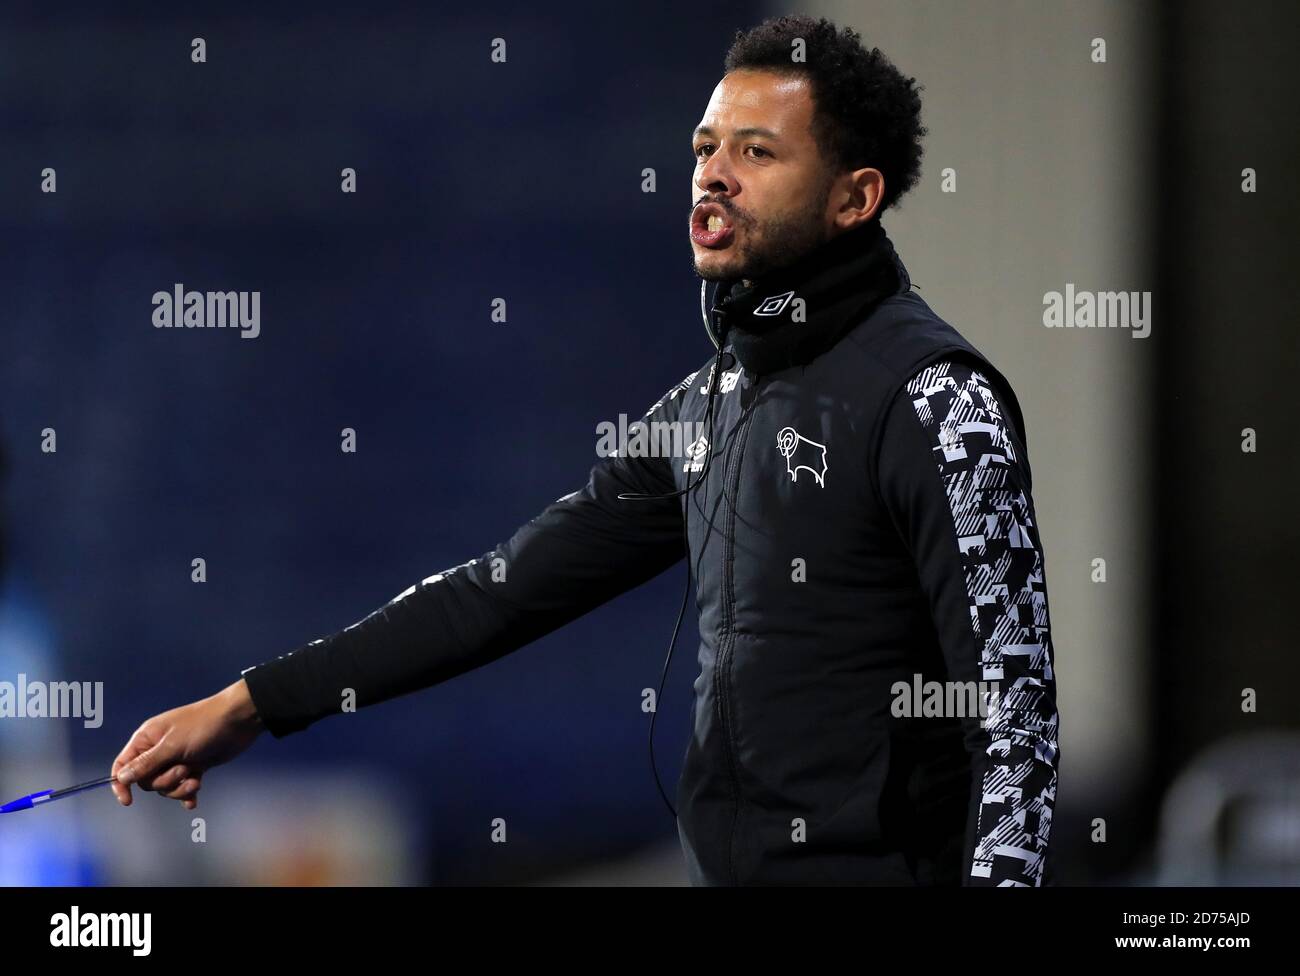 Huddersfield Town performance coach Callum Adams instructs his players during the Sky Bet Championship match at The John Smith's Stadium, Huddersfield. Stock Photo